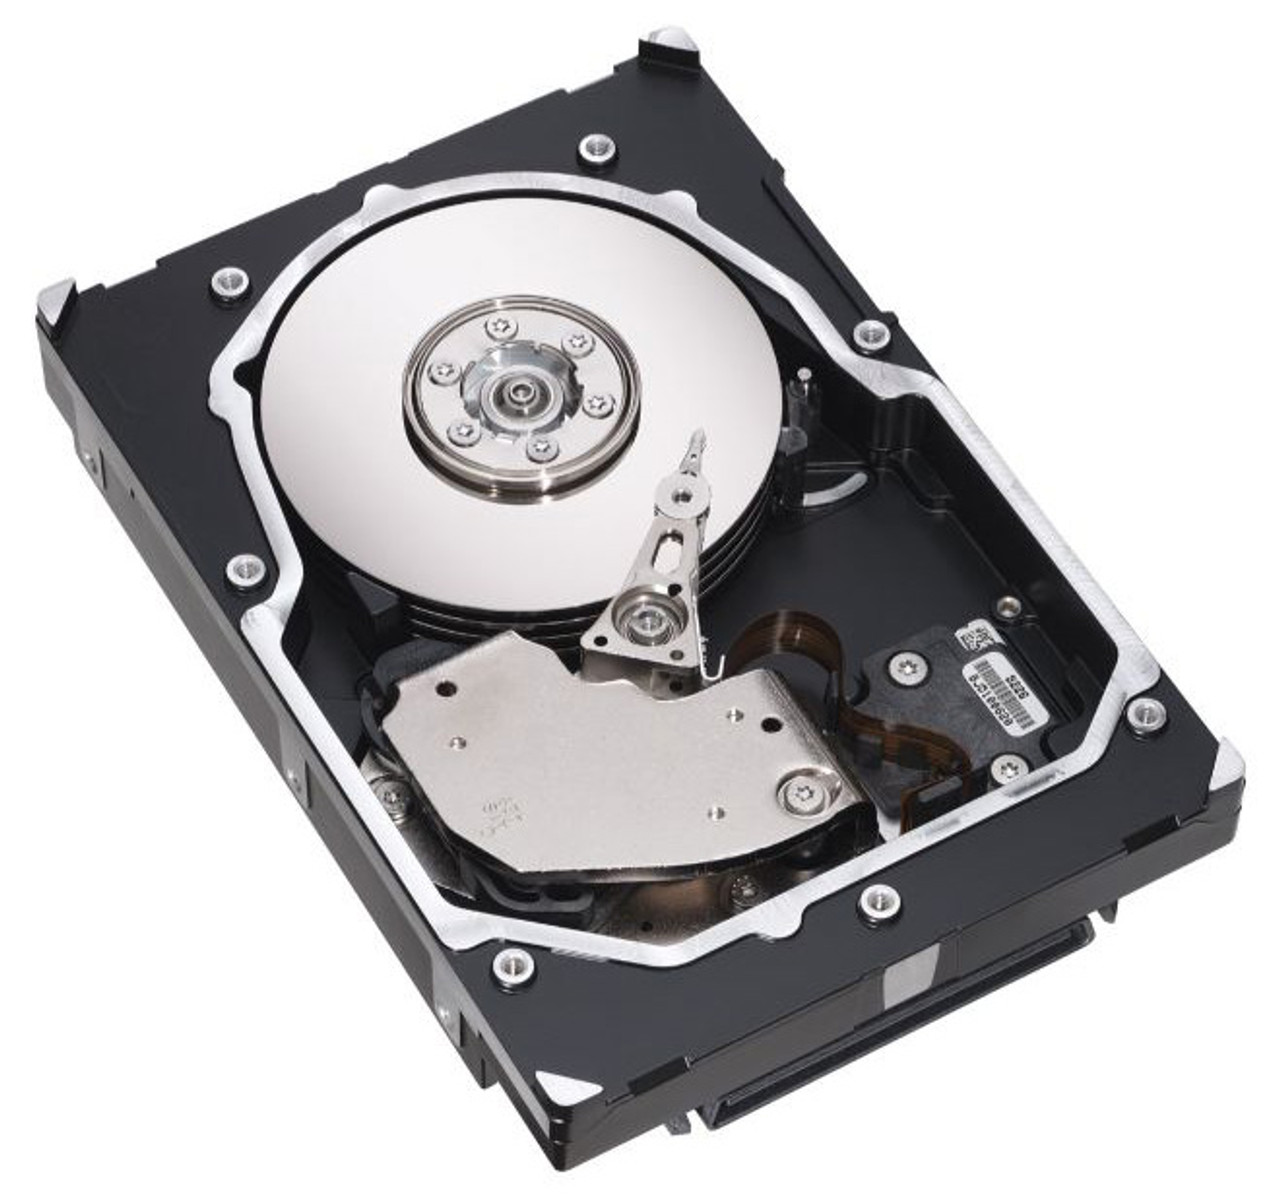 2082-0004-03 NetApp 146GB 10000RPM Fibre Channel 2Gbps 8MB Cache 3.5-inch Internal Hard Drive for SpinStor-100